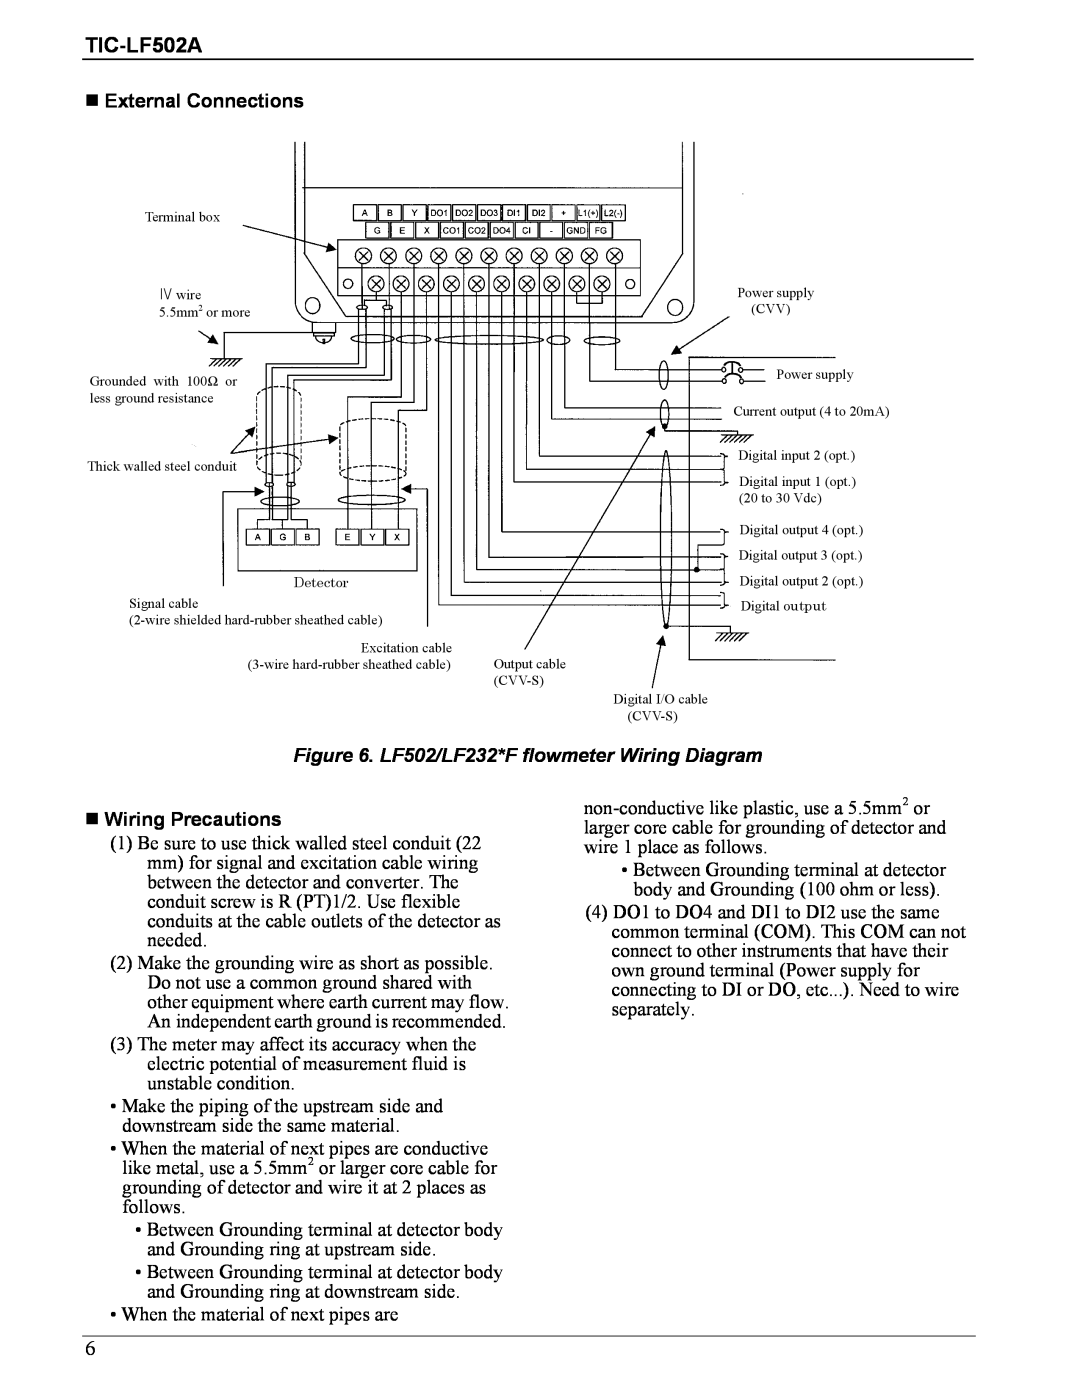 Toshiba specifications External Connections, LF502/LF232*F flowmeter Wiring Diagram, Wiring Precautions, TIC-LF502A 